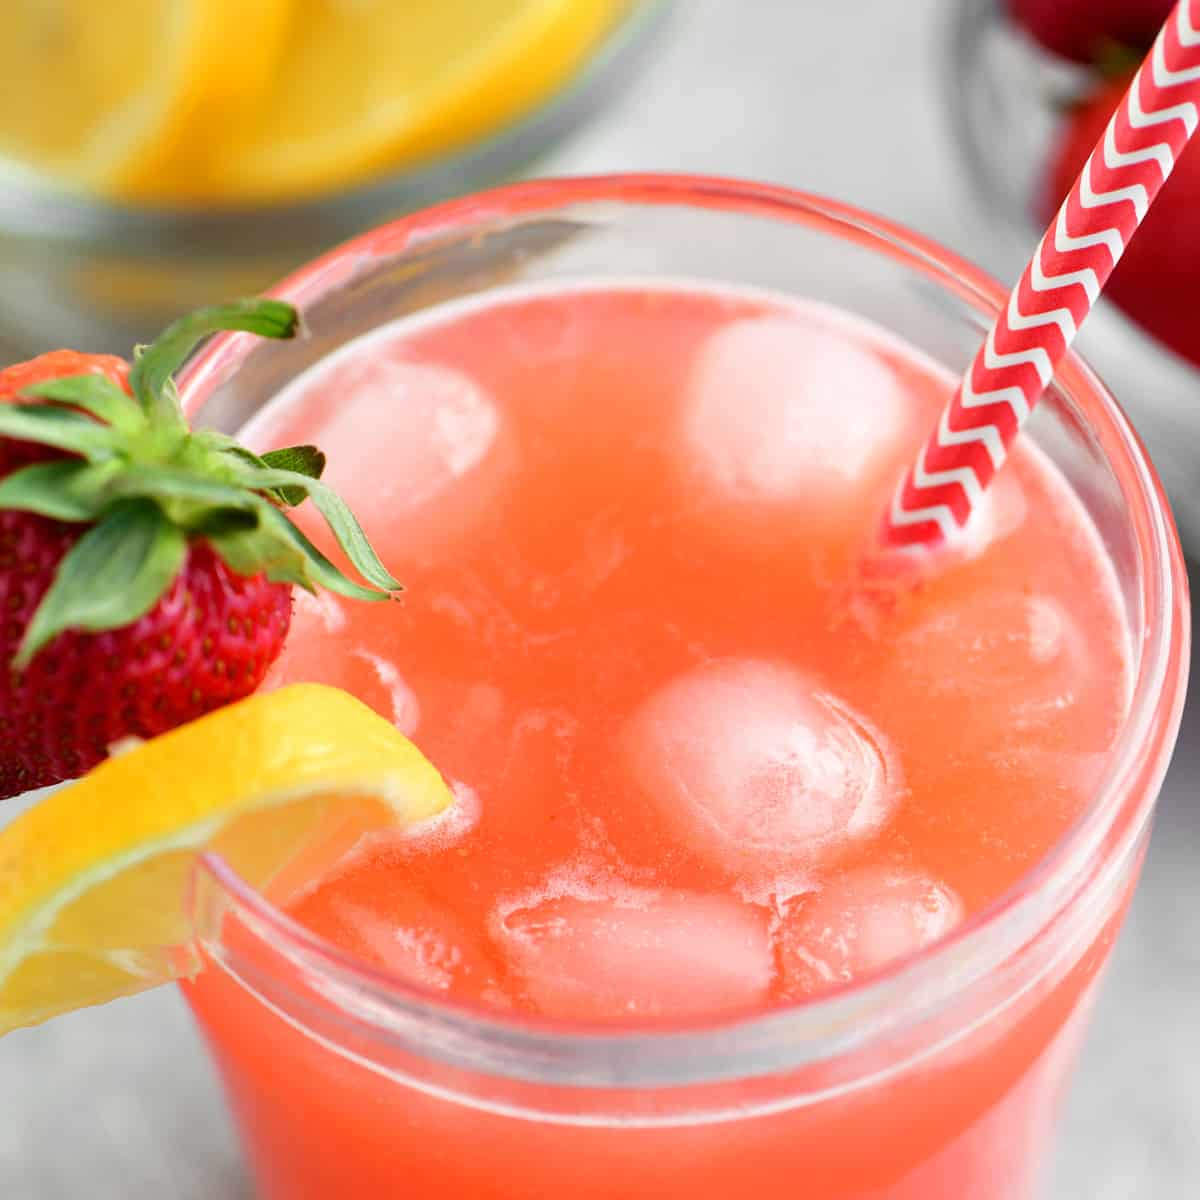 strawberry lemonade in a glass with a red and white striped straw